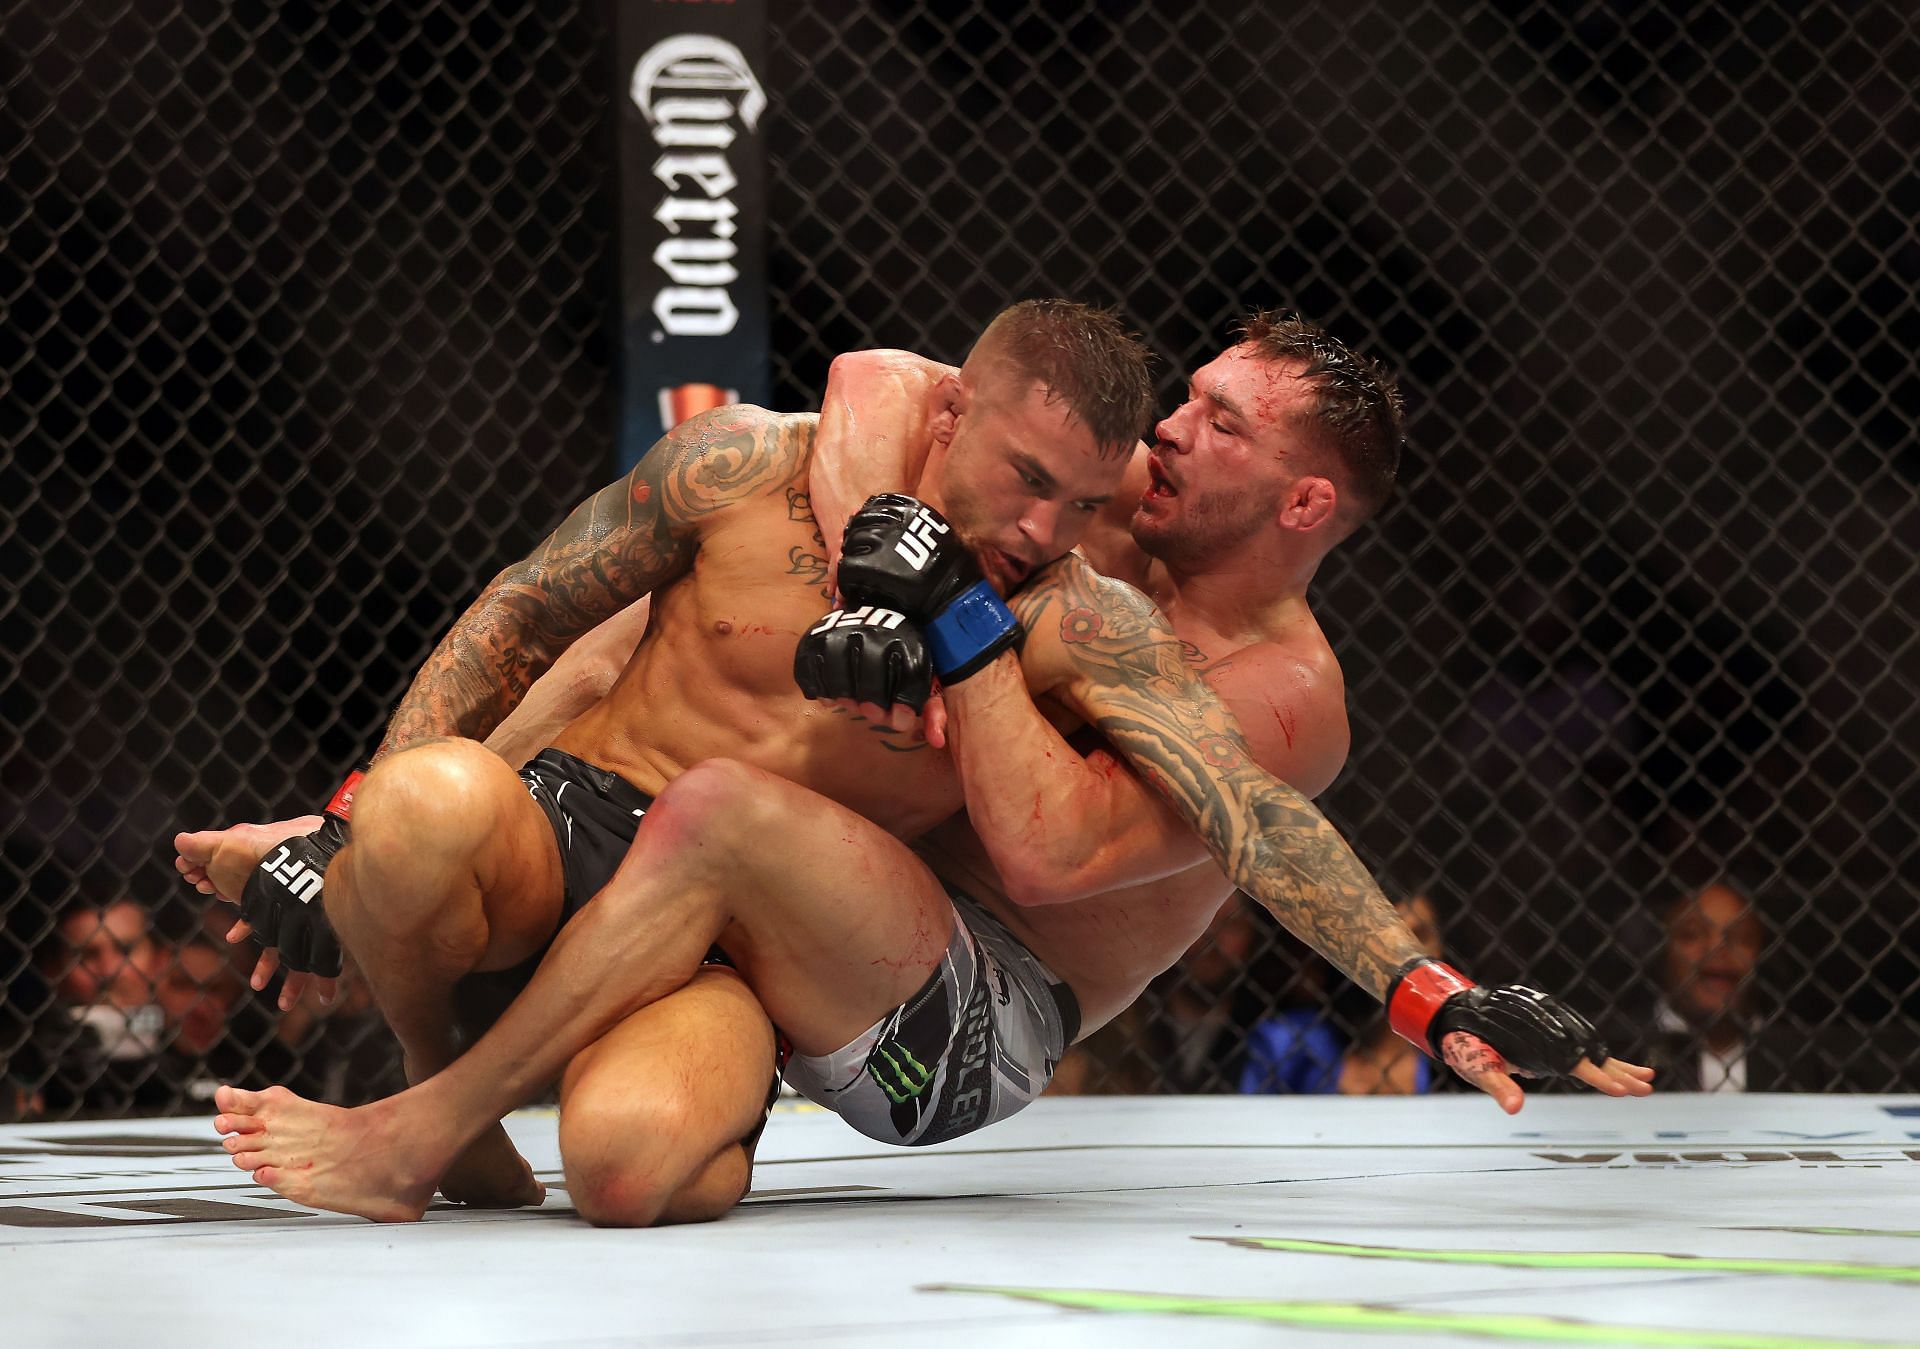 A rematch with Dustin Poirier would be a huge deal for Michael Chandler